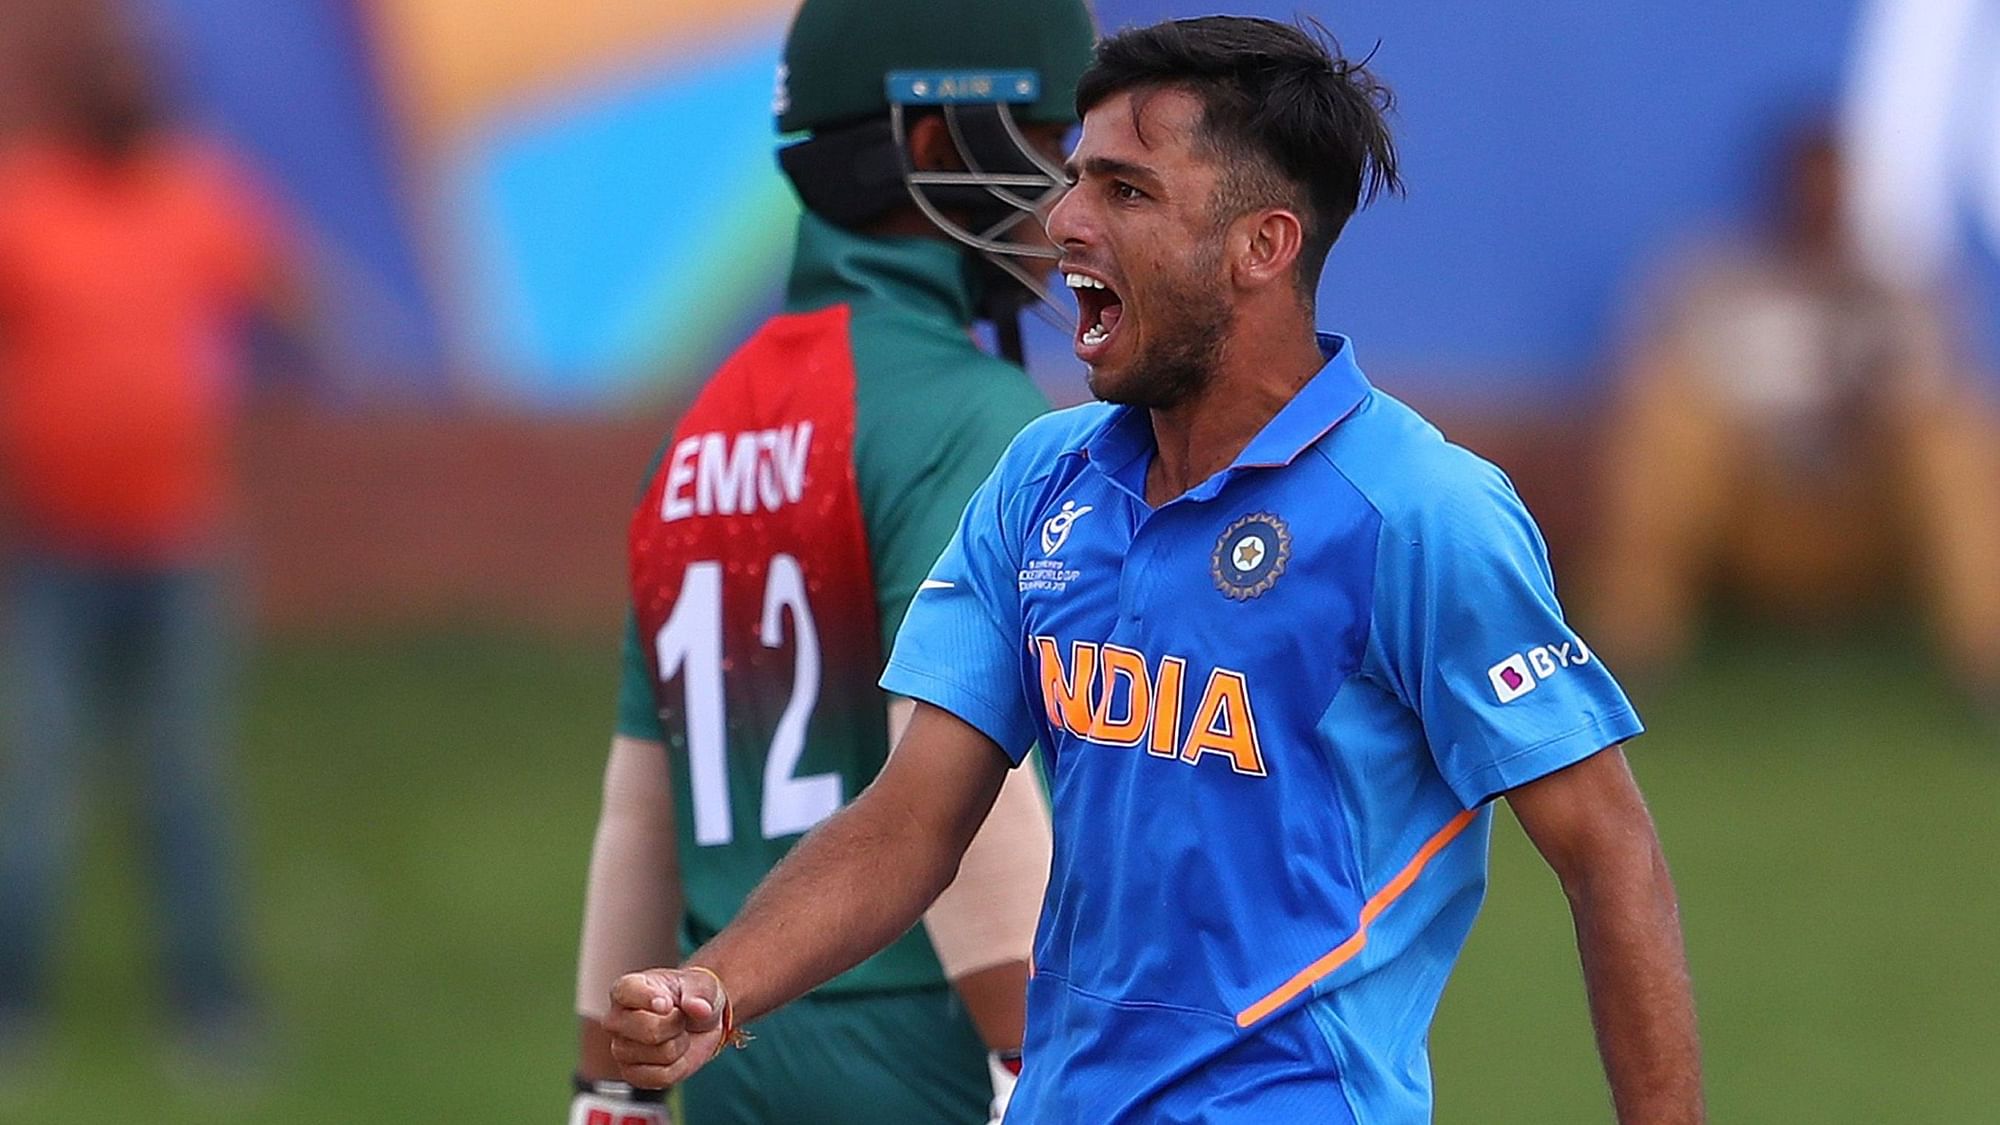 India’s Ravi Bishnoi and Akash Singh are among 5 players reprimanded by the ICC for the on-field spat after the Under-19 World Cup final.